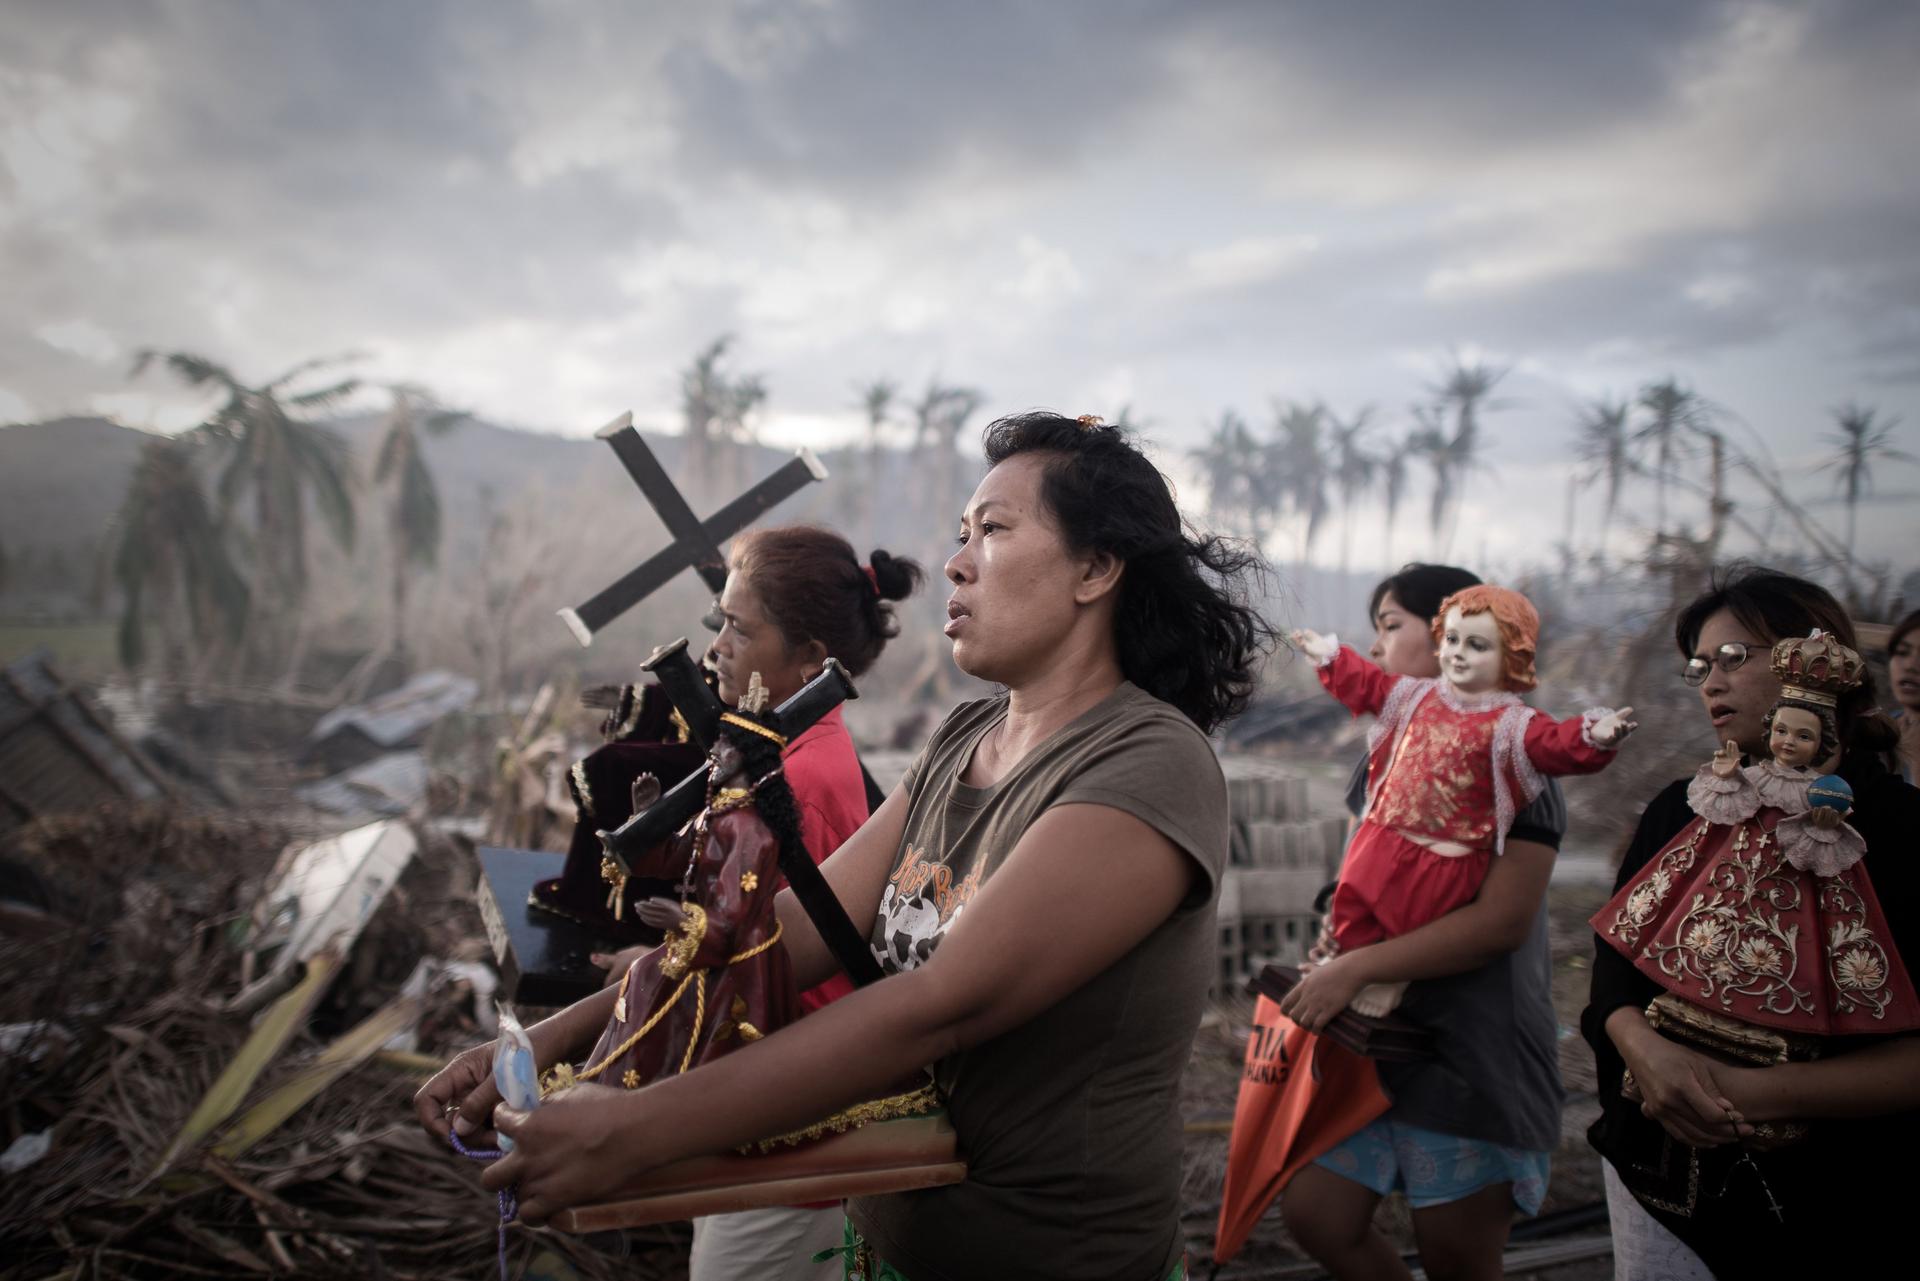 Opong's typhoon survivors hold a religious procession 10 days after the storm struck in this award-winning photo. Photo: AFP